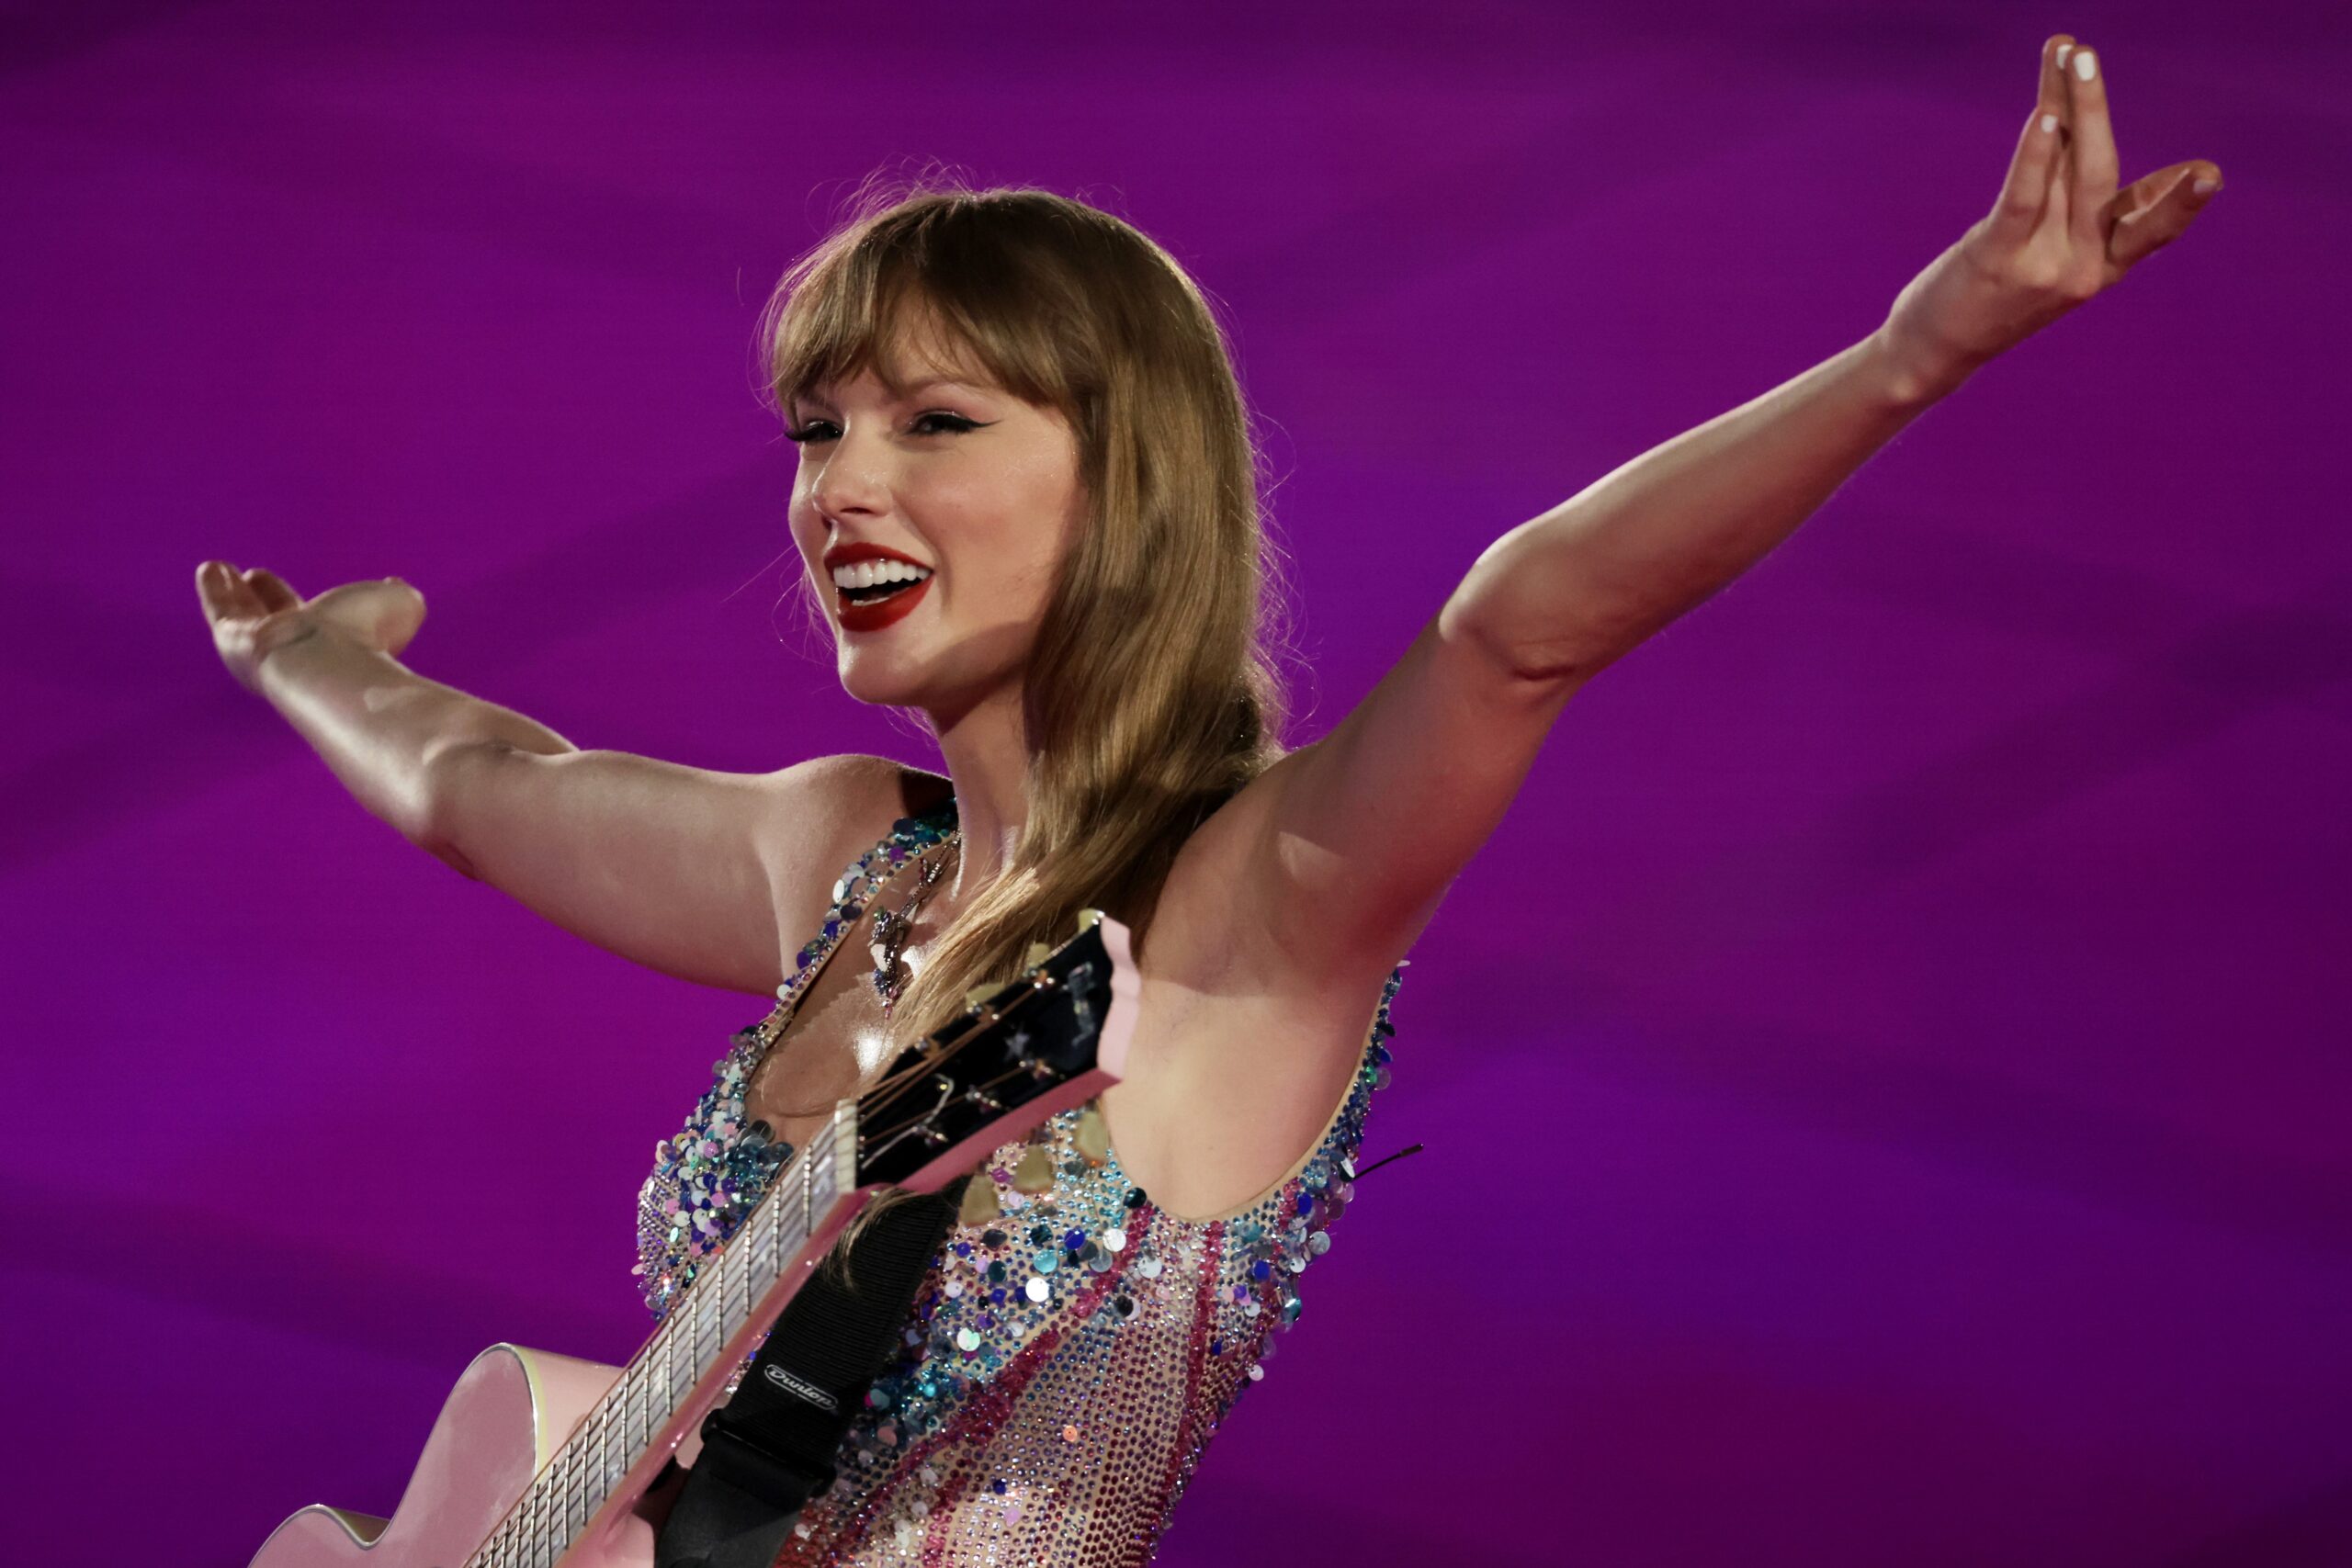 Taylor Swift smiling and raising her arms while performing at The Eras Tour.